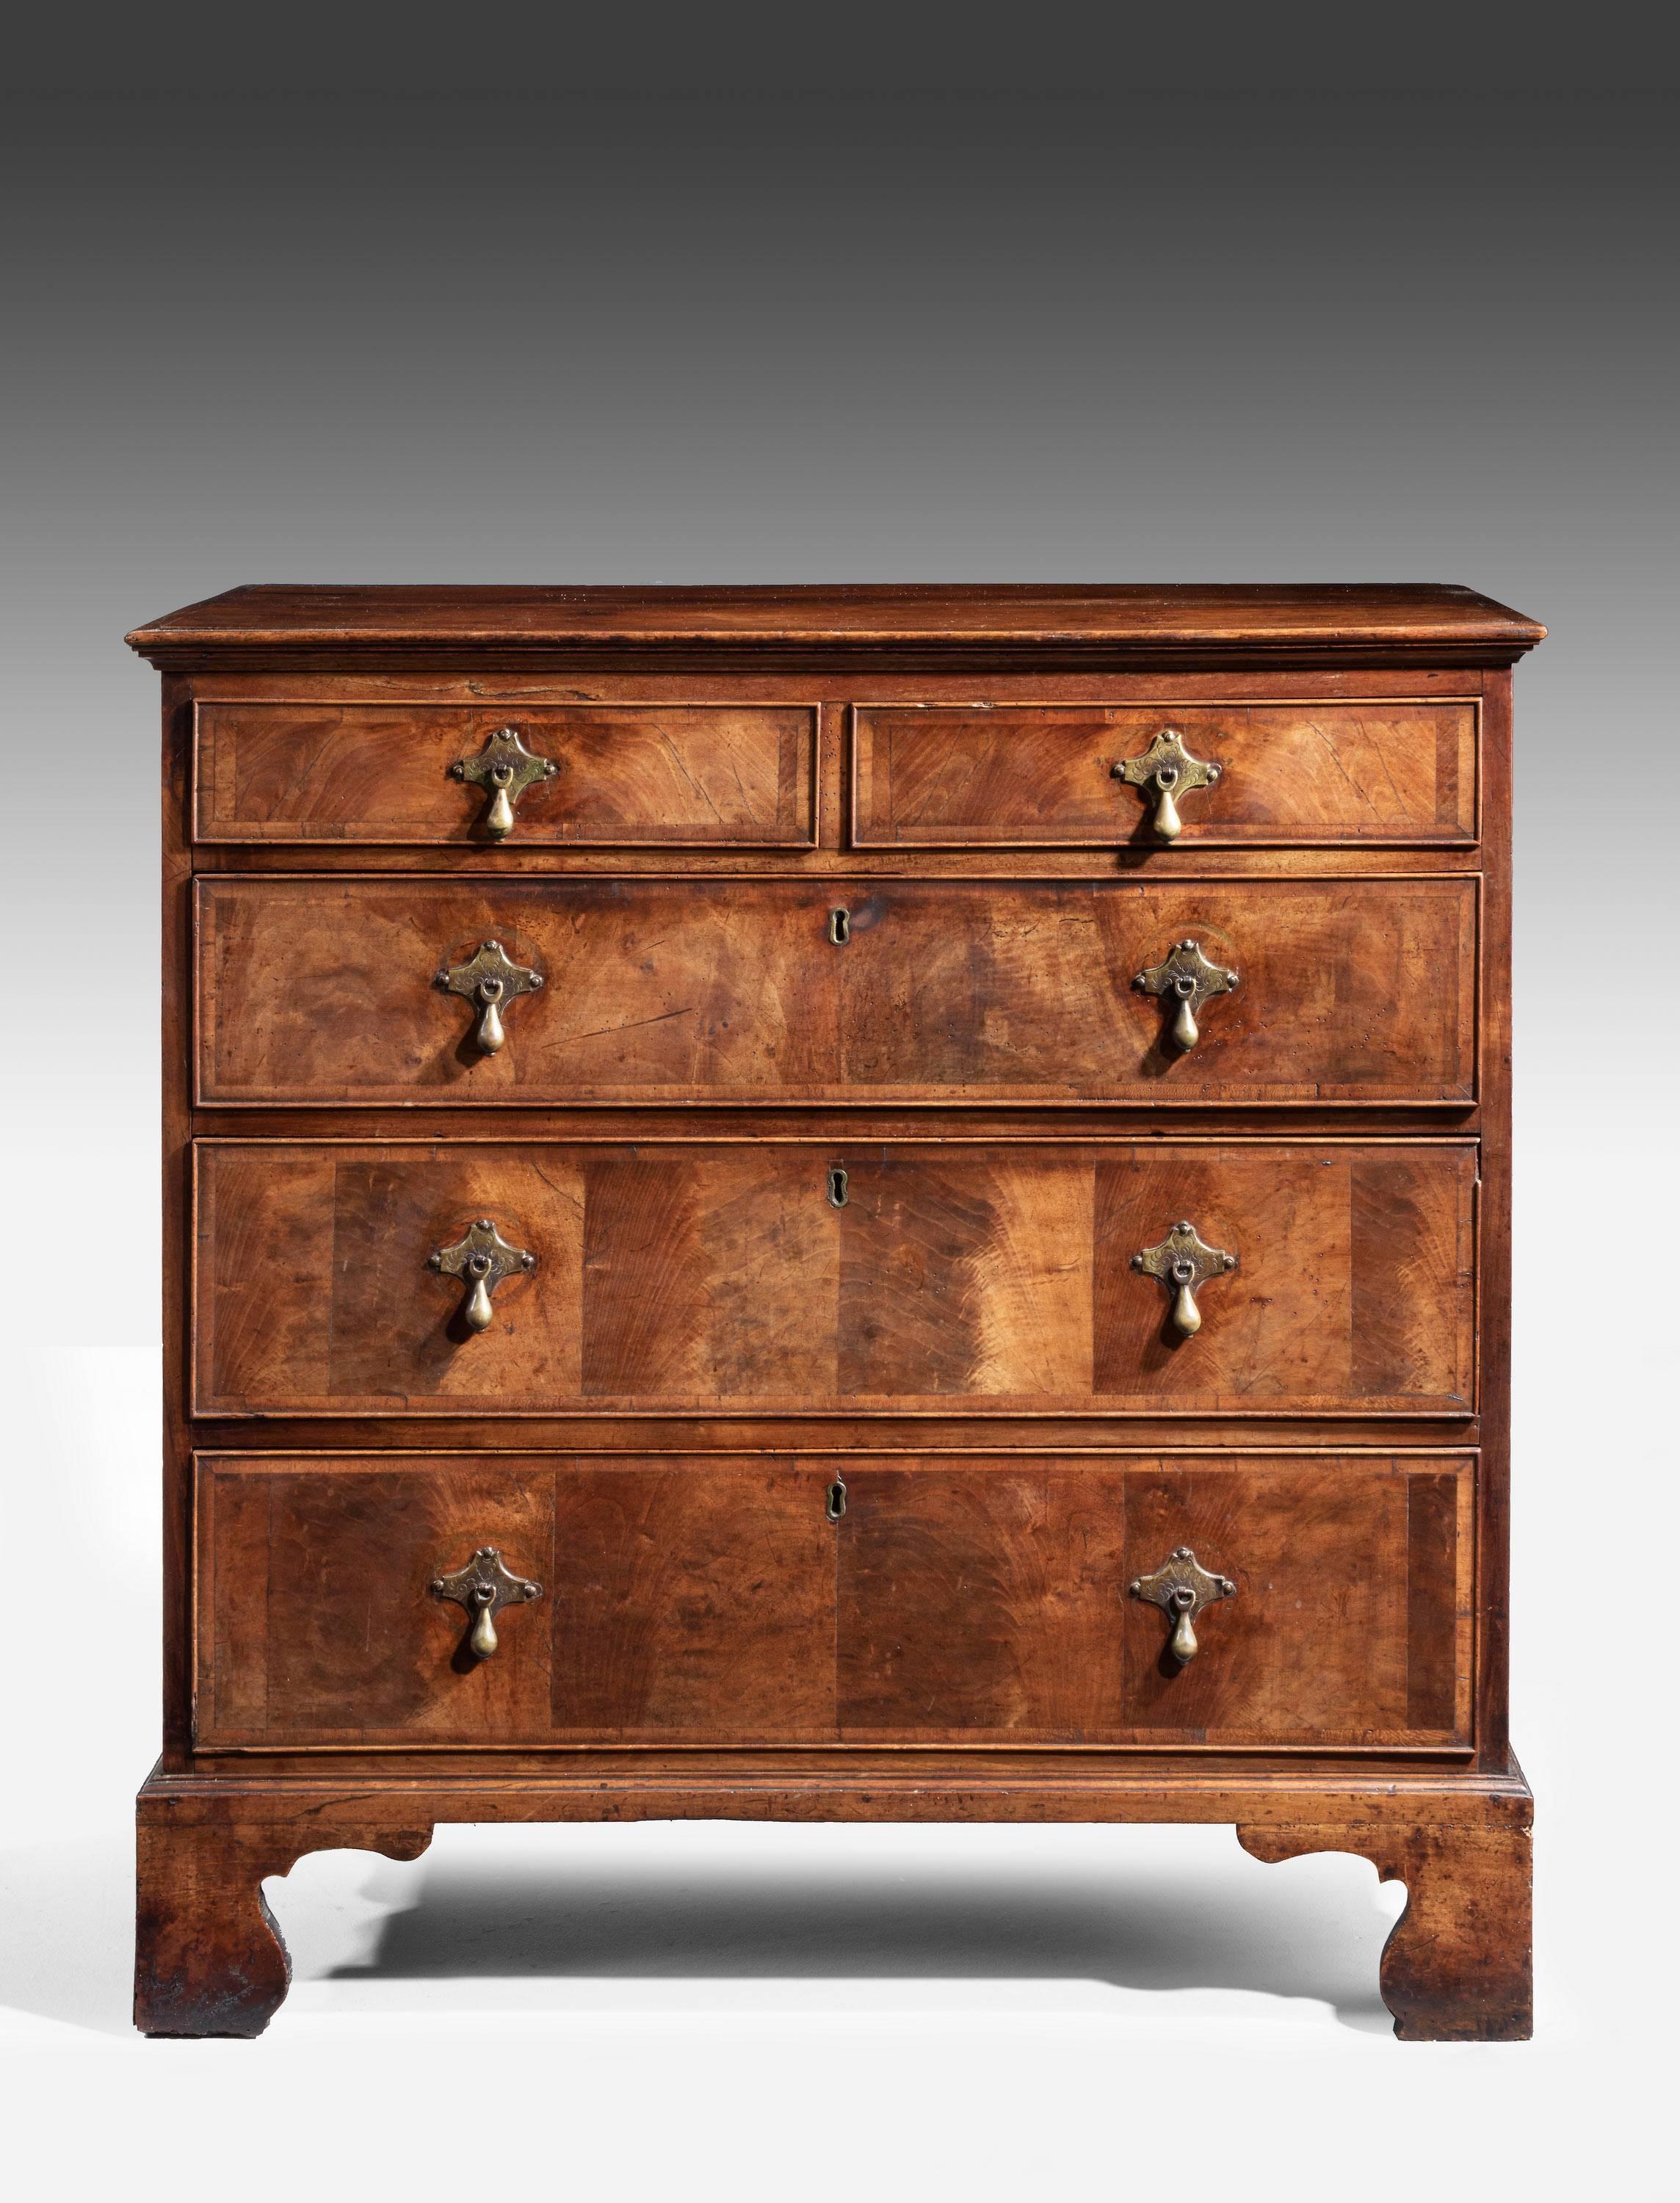 A attractive mid-18th century walnut chest of drawers. The ends of bone inlay and crossbanded. Period brass. High shaped bracket feet.